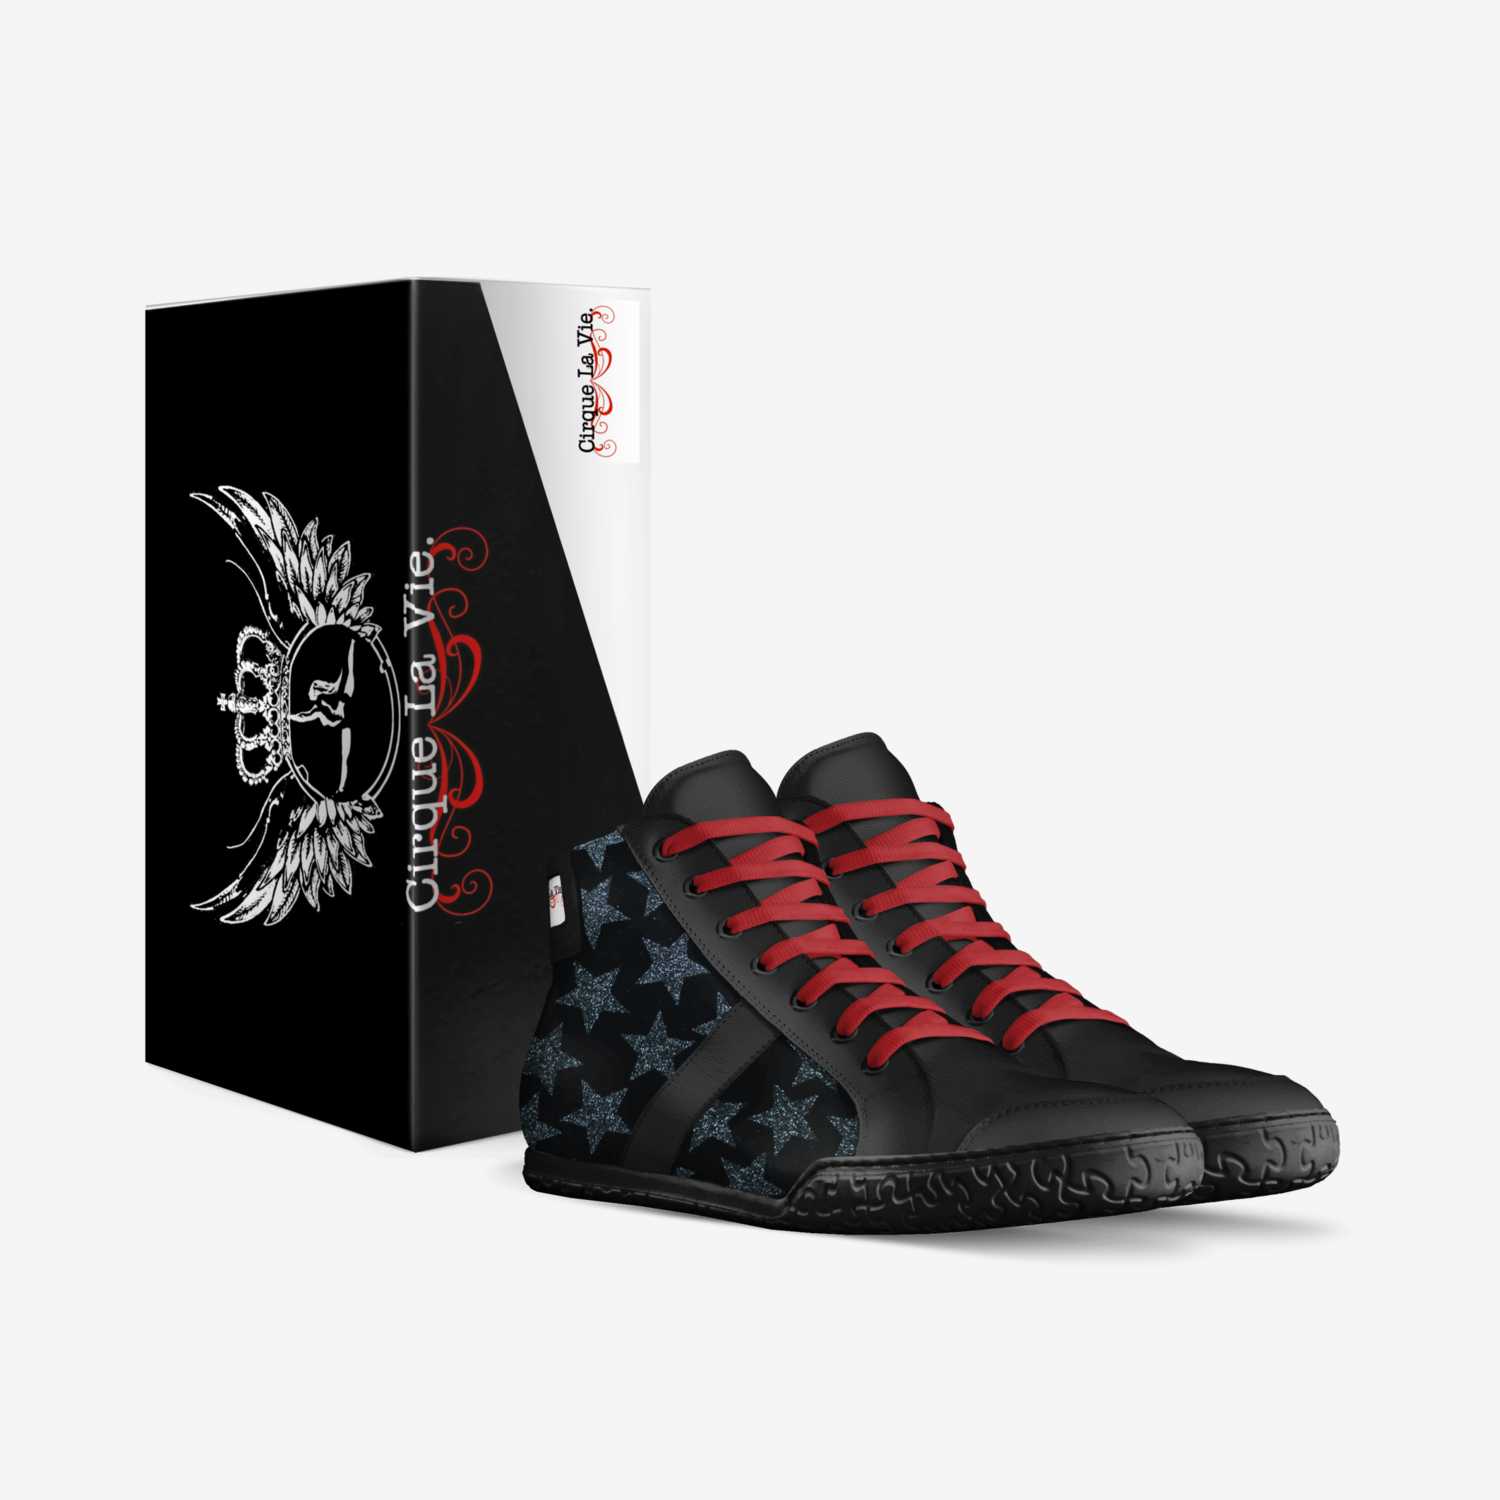 THE ACROBAT custom made in Italy shoes by Monsters And Maniacs | Box view